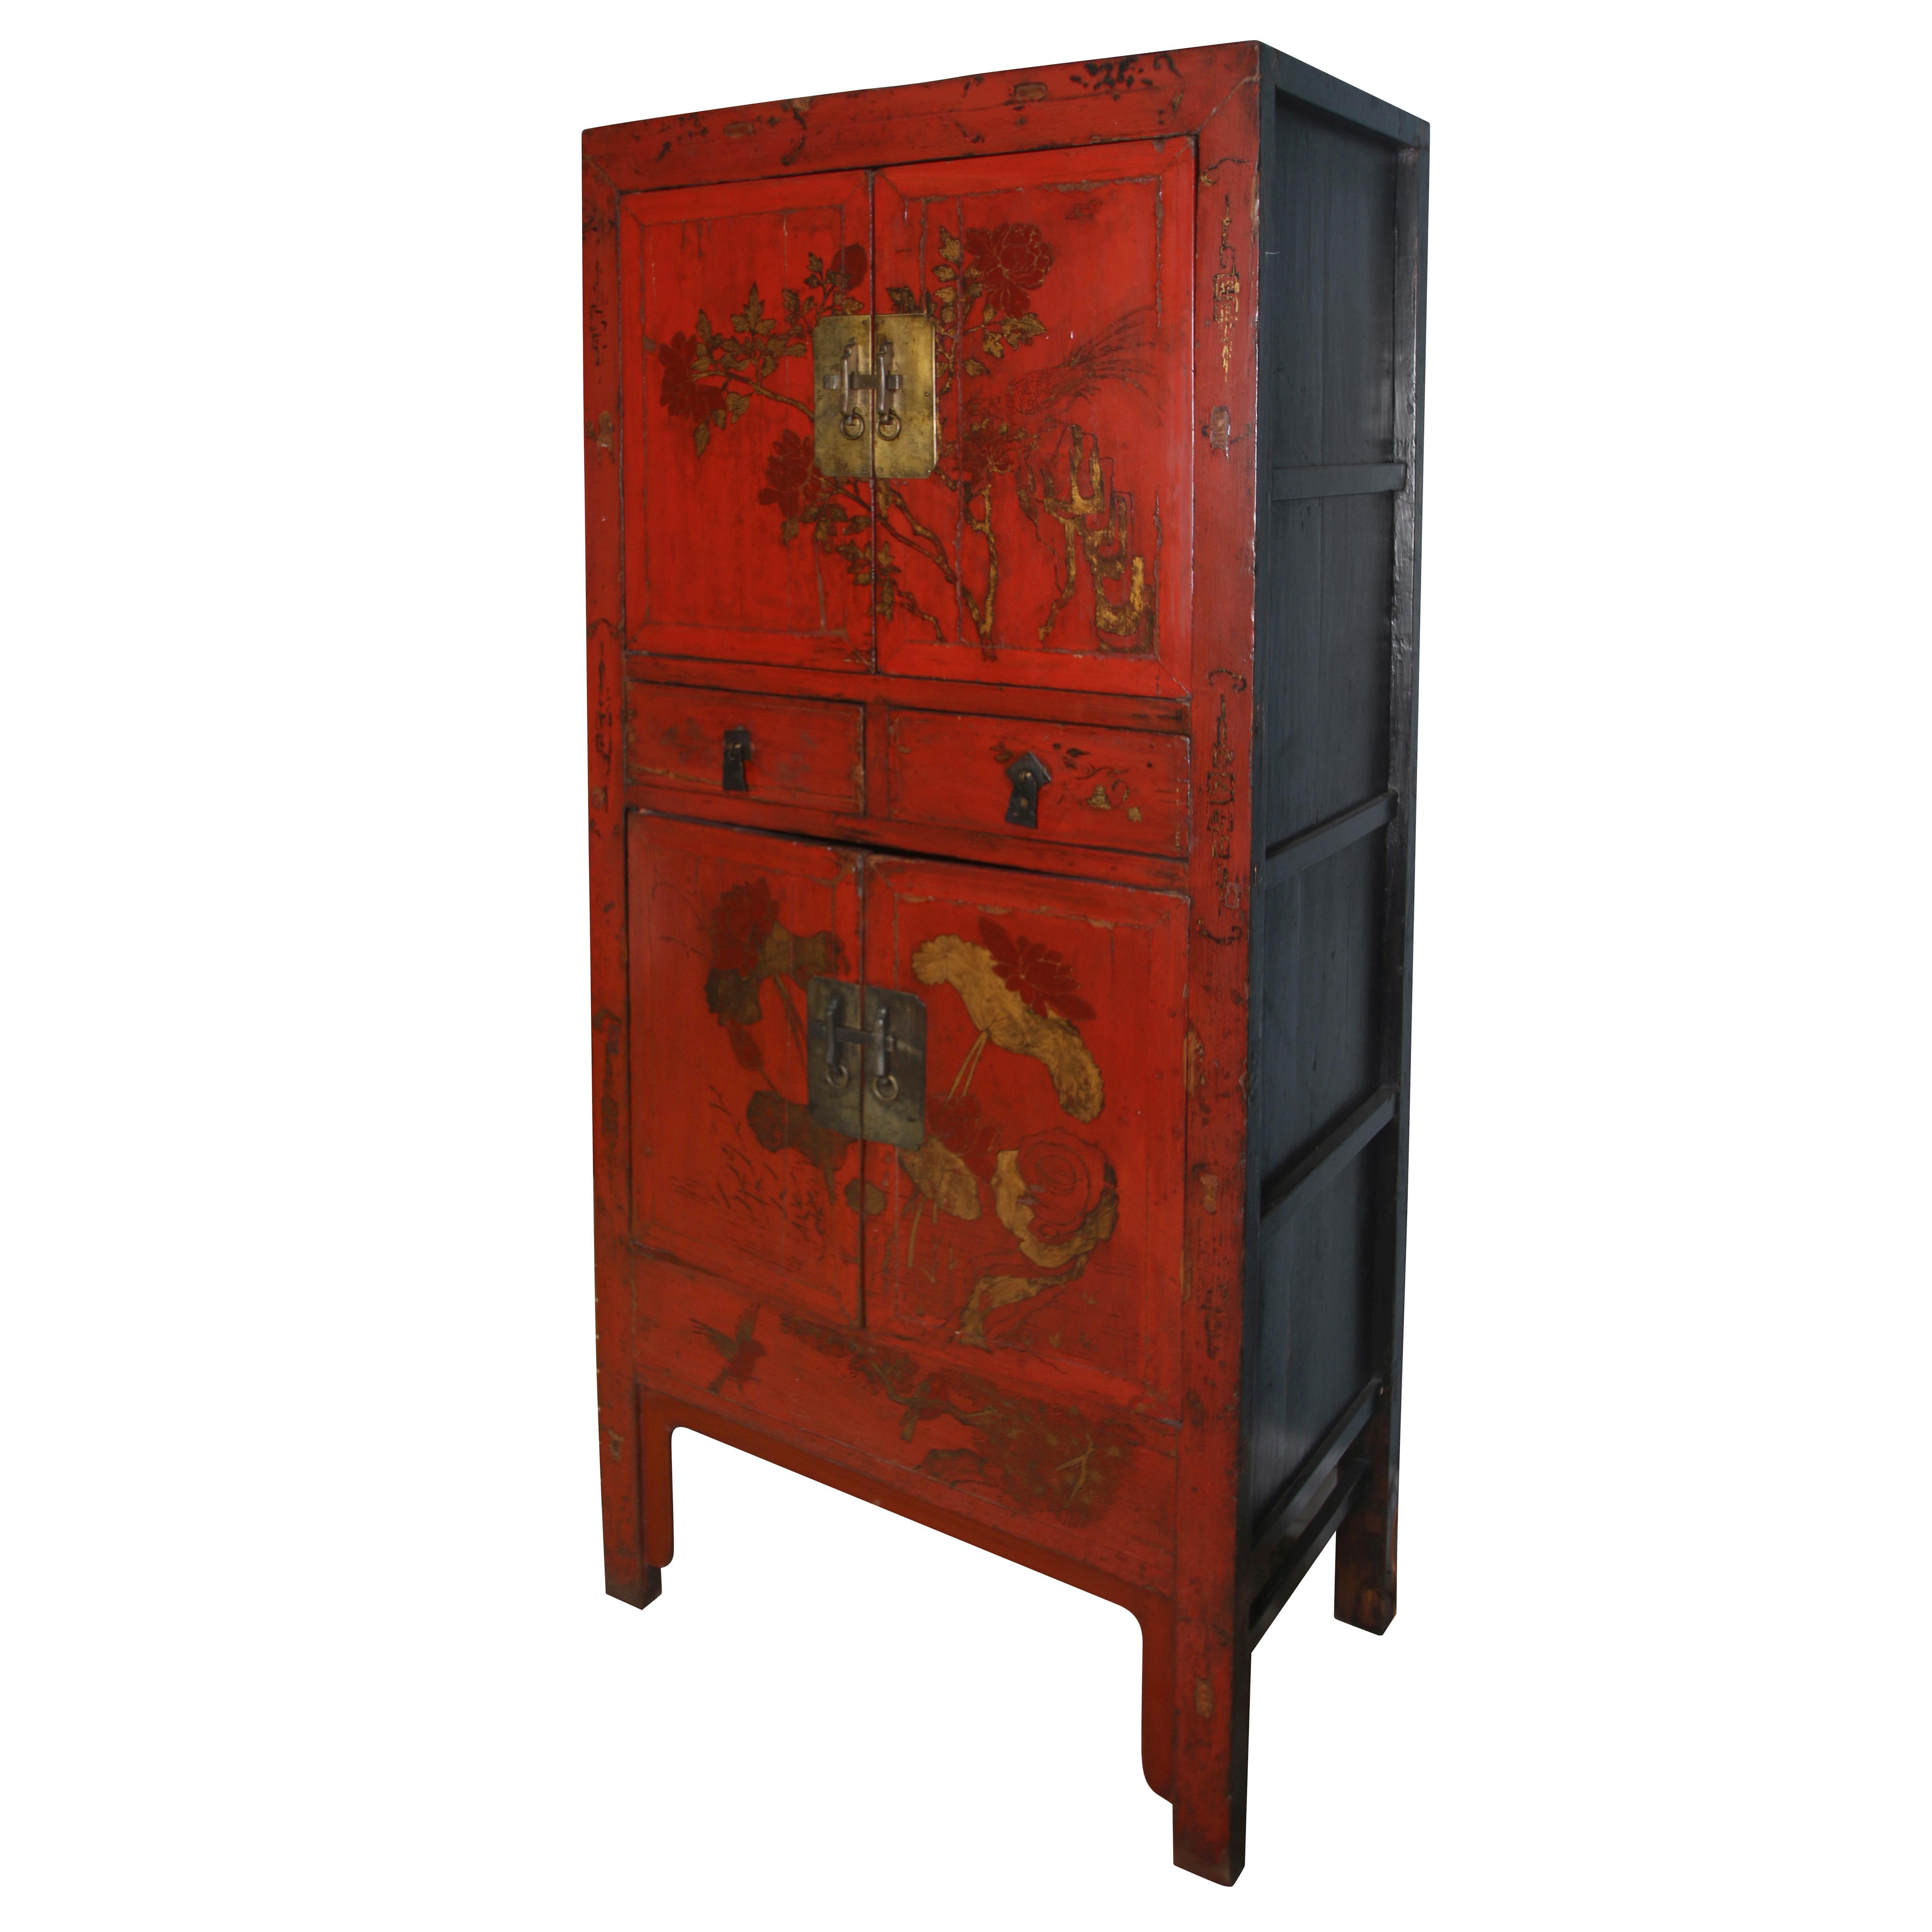 A pair of tall vintage Asian red lacquer cabinets with gold branch and leaf design and square brass hardware. Two small center drawers are flanked by pairs of doors above and below that open to reveal shelves.